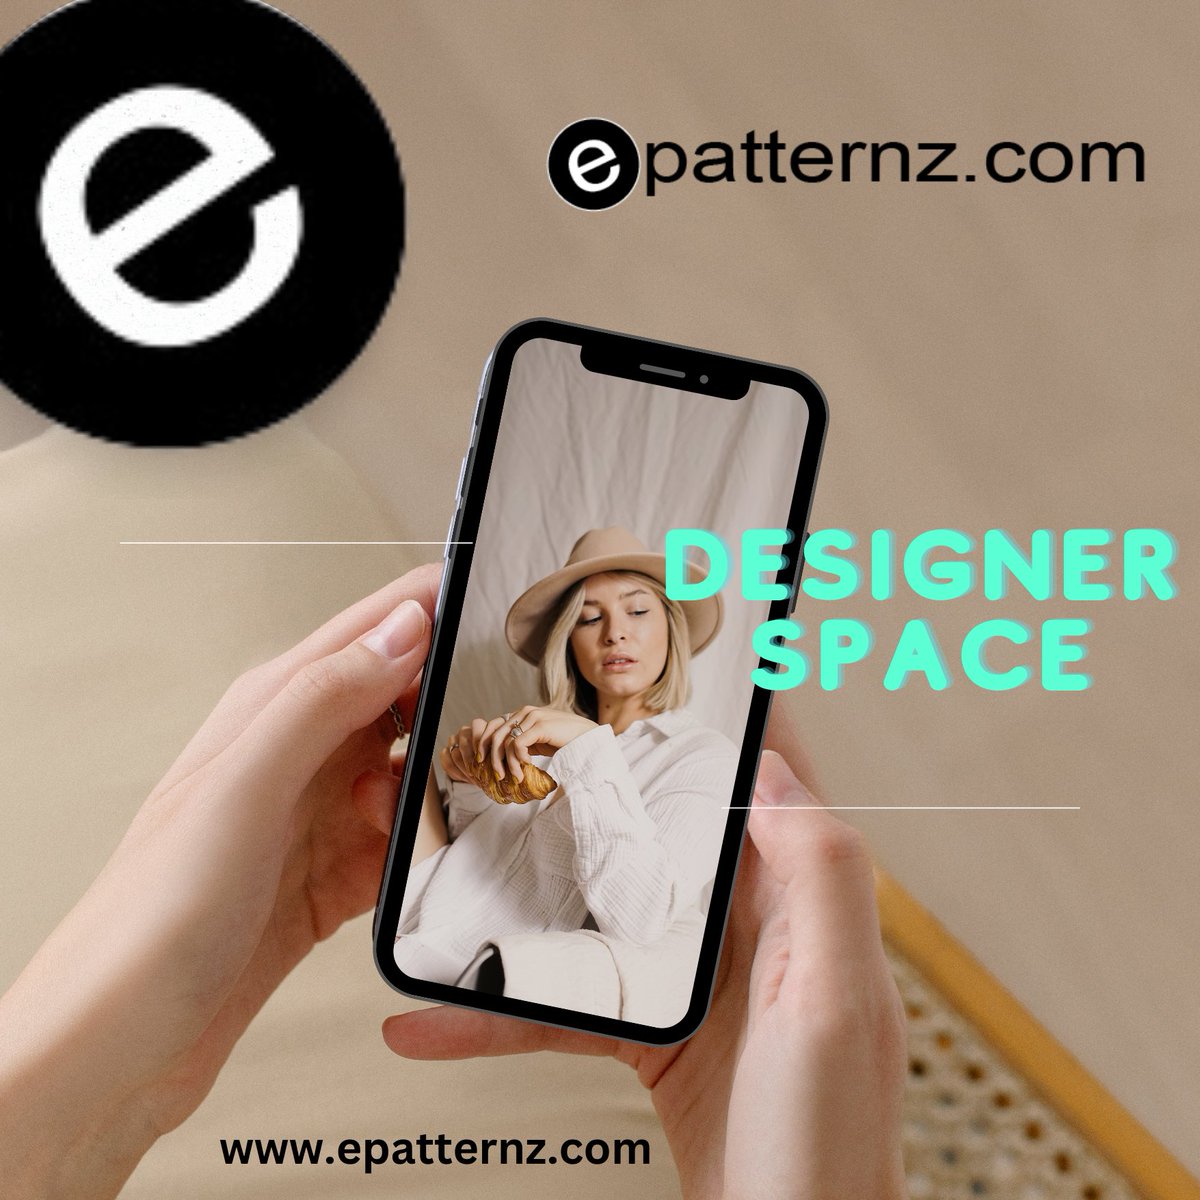 Unlock new opportunities with epatternz.com!

Upload your artwork, set your prices, and start earning more than just applause. Join our creative community now!

#CreativeEarners #PatternSelling #ArtisticCommunity #MakeArtWork #DesignerOpportunities #CreativityPays